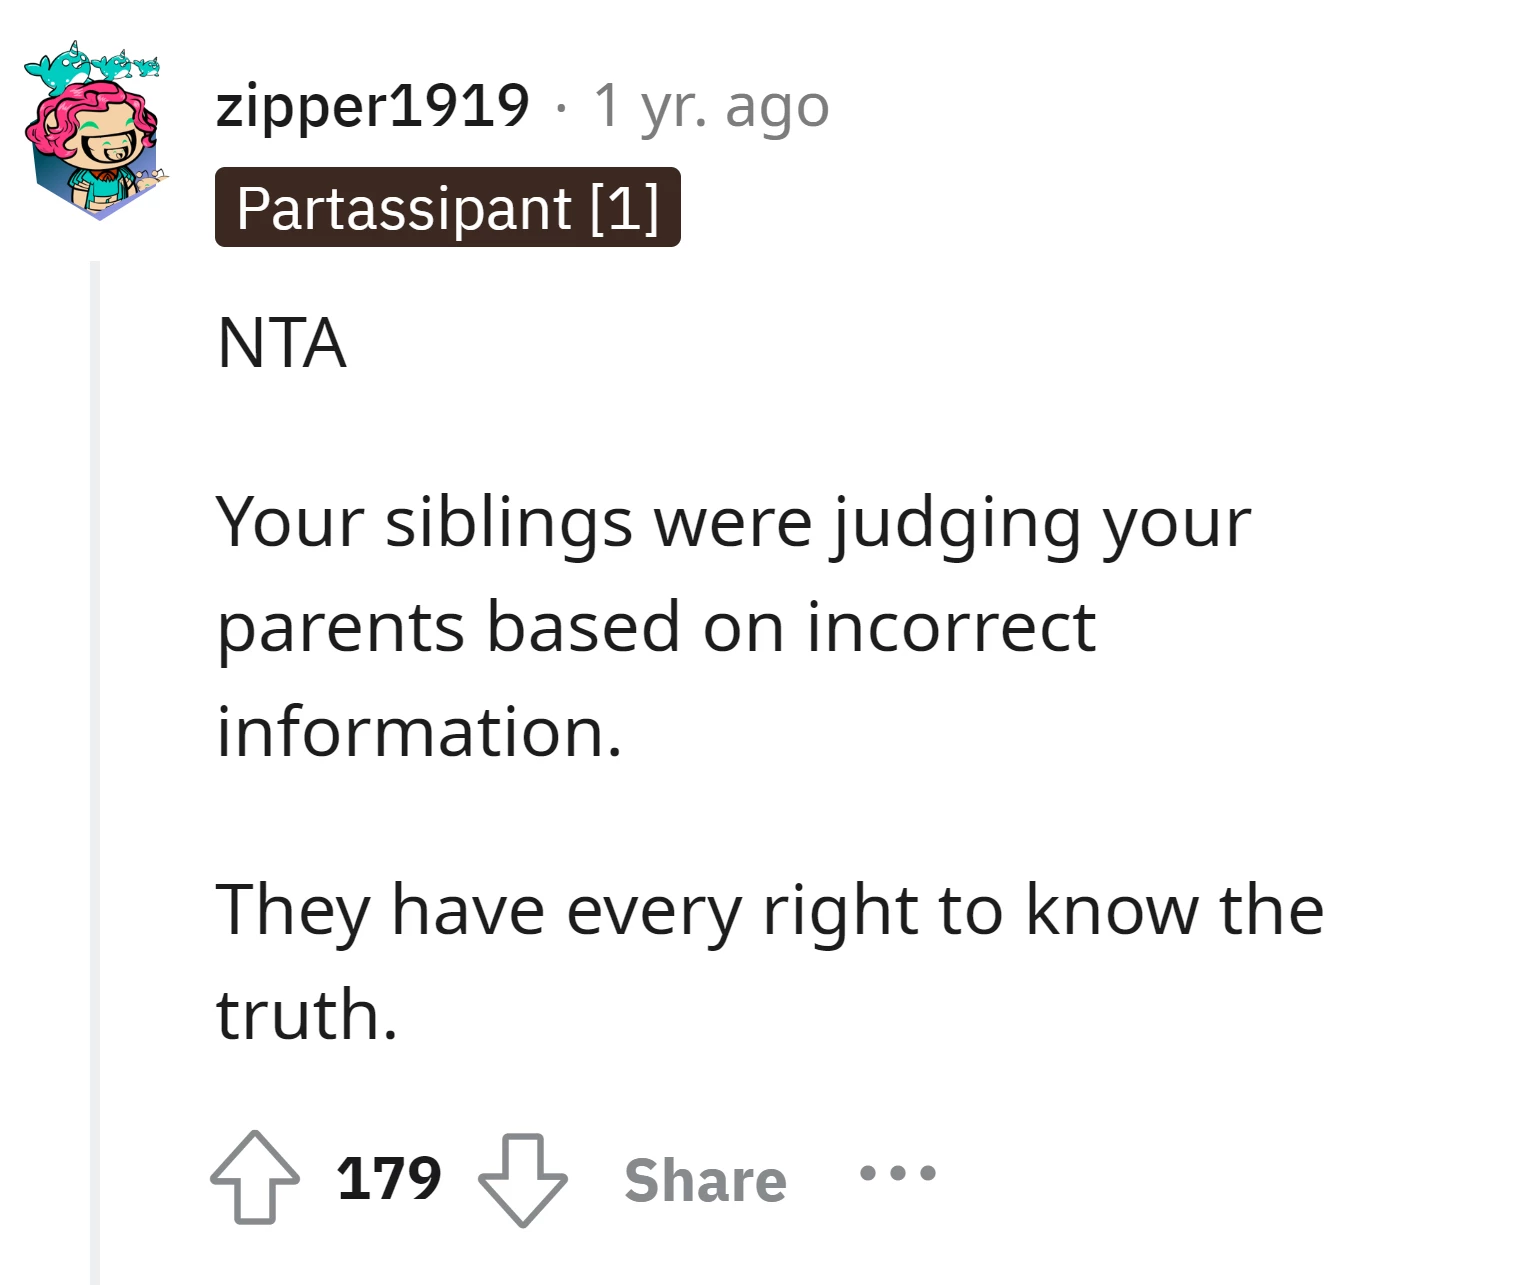 The siblings have every right to know the truth